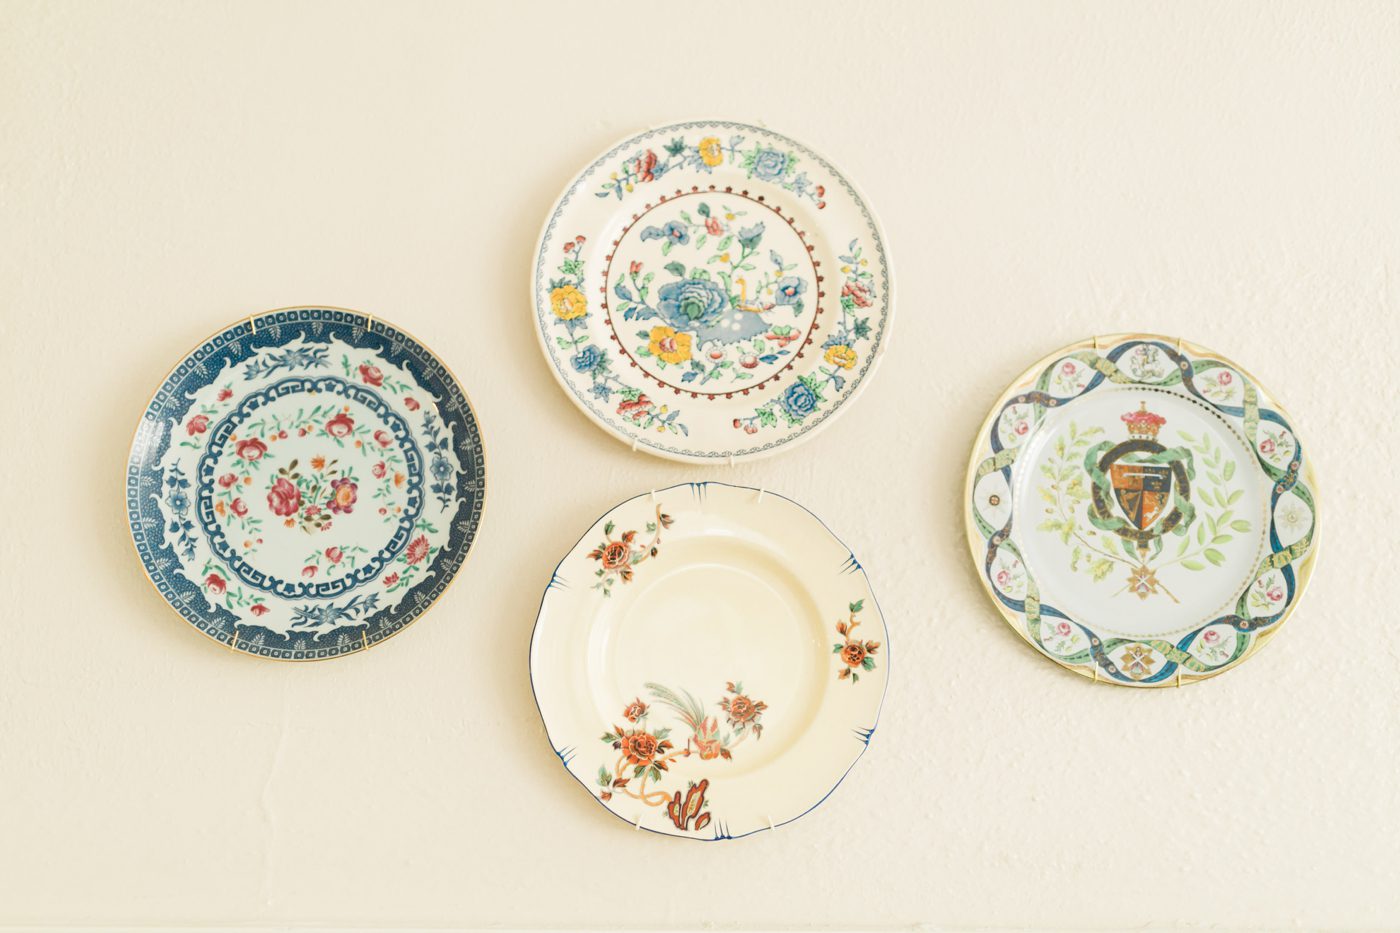 Vintage plates hanging on the wall for home decor